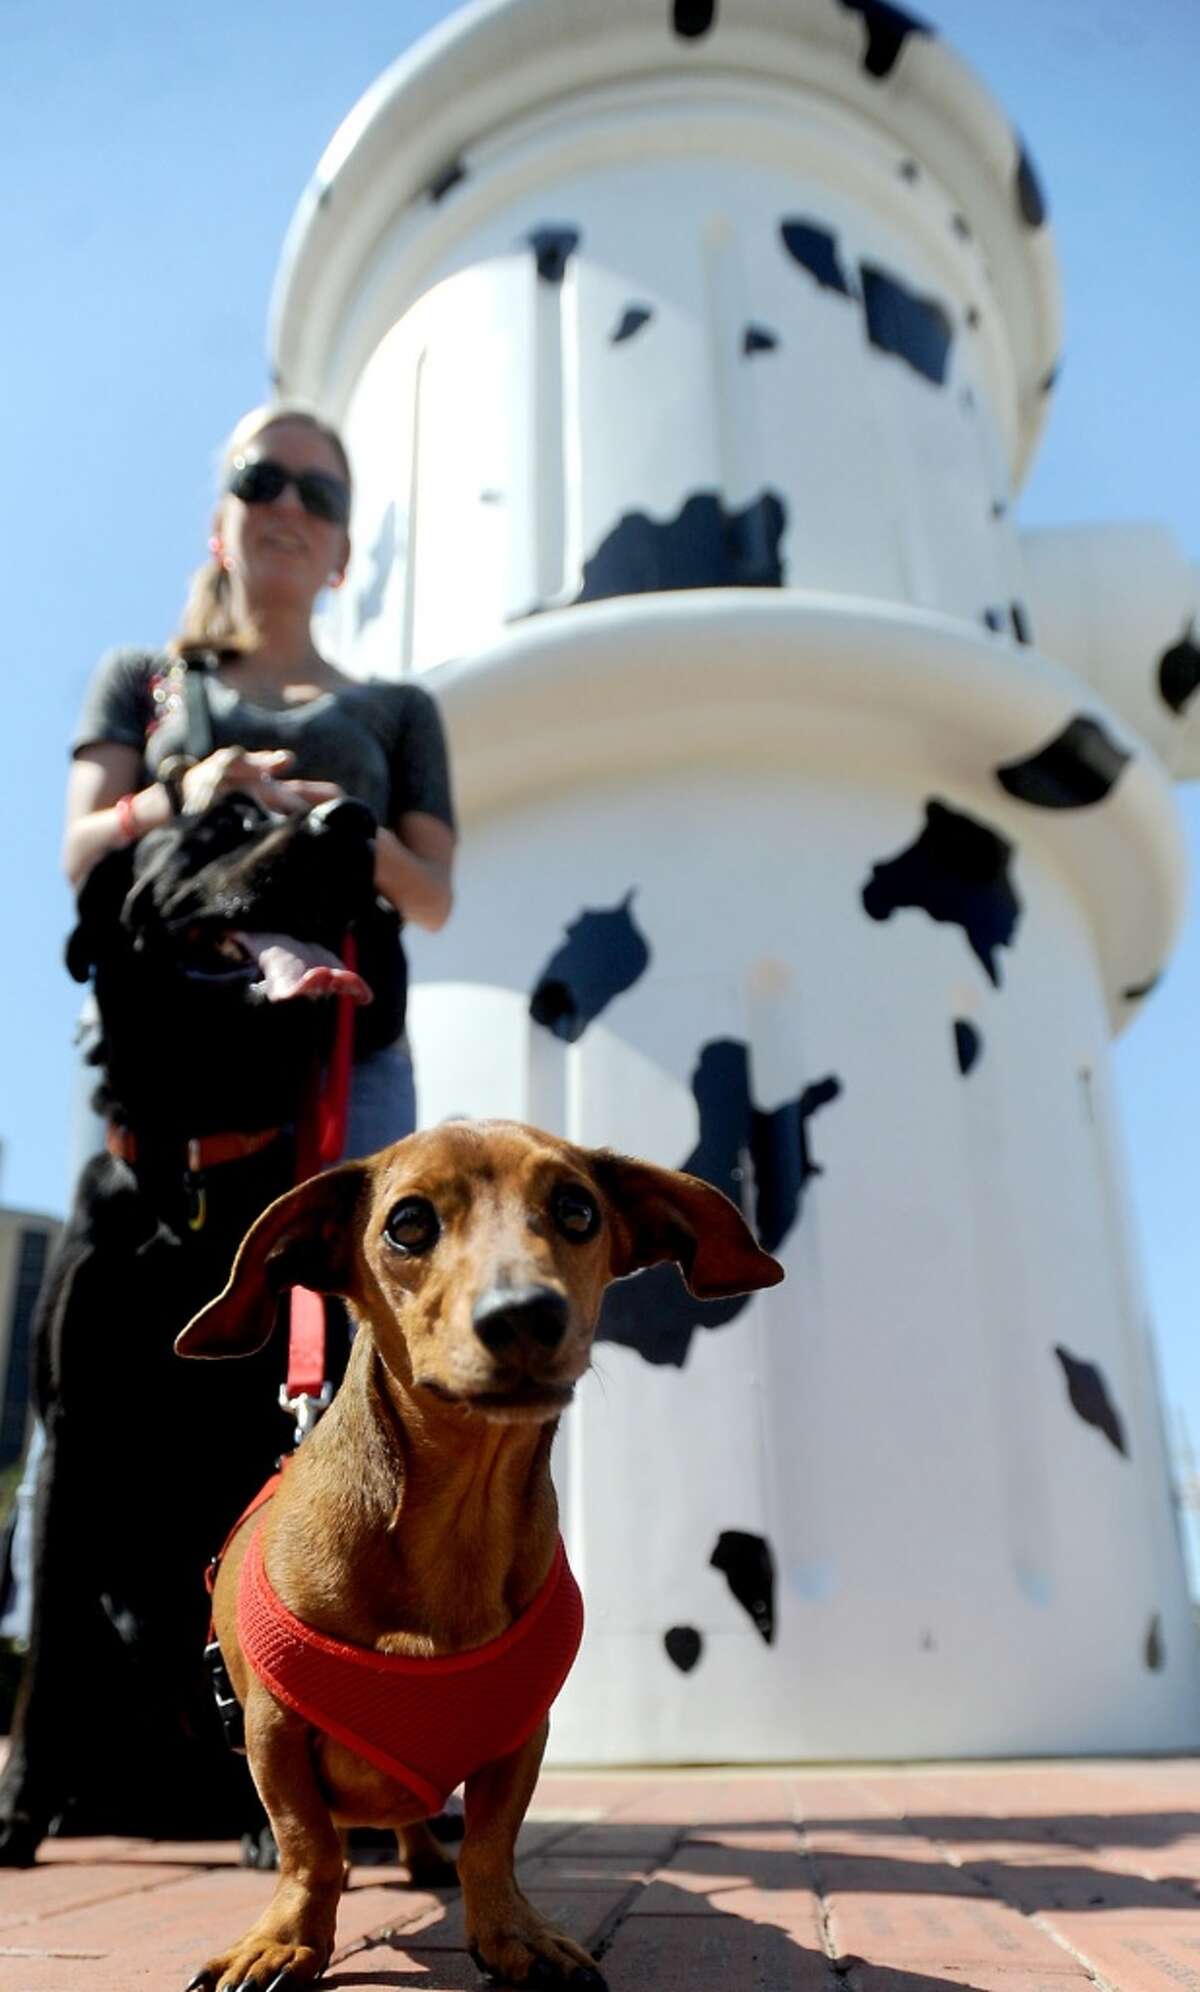 Doxi poses for a portrait in front of the giant fire hydrant during Dogtoberfest downtown Beaumont, Saturday. Tammy McKinley/The Enterprise